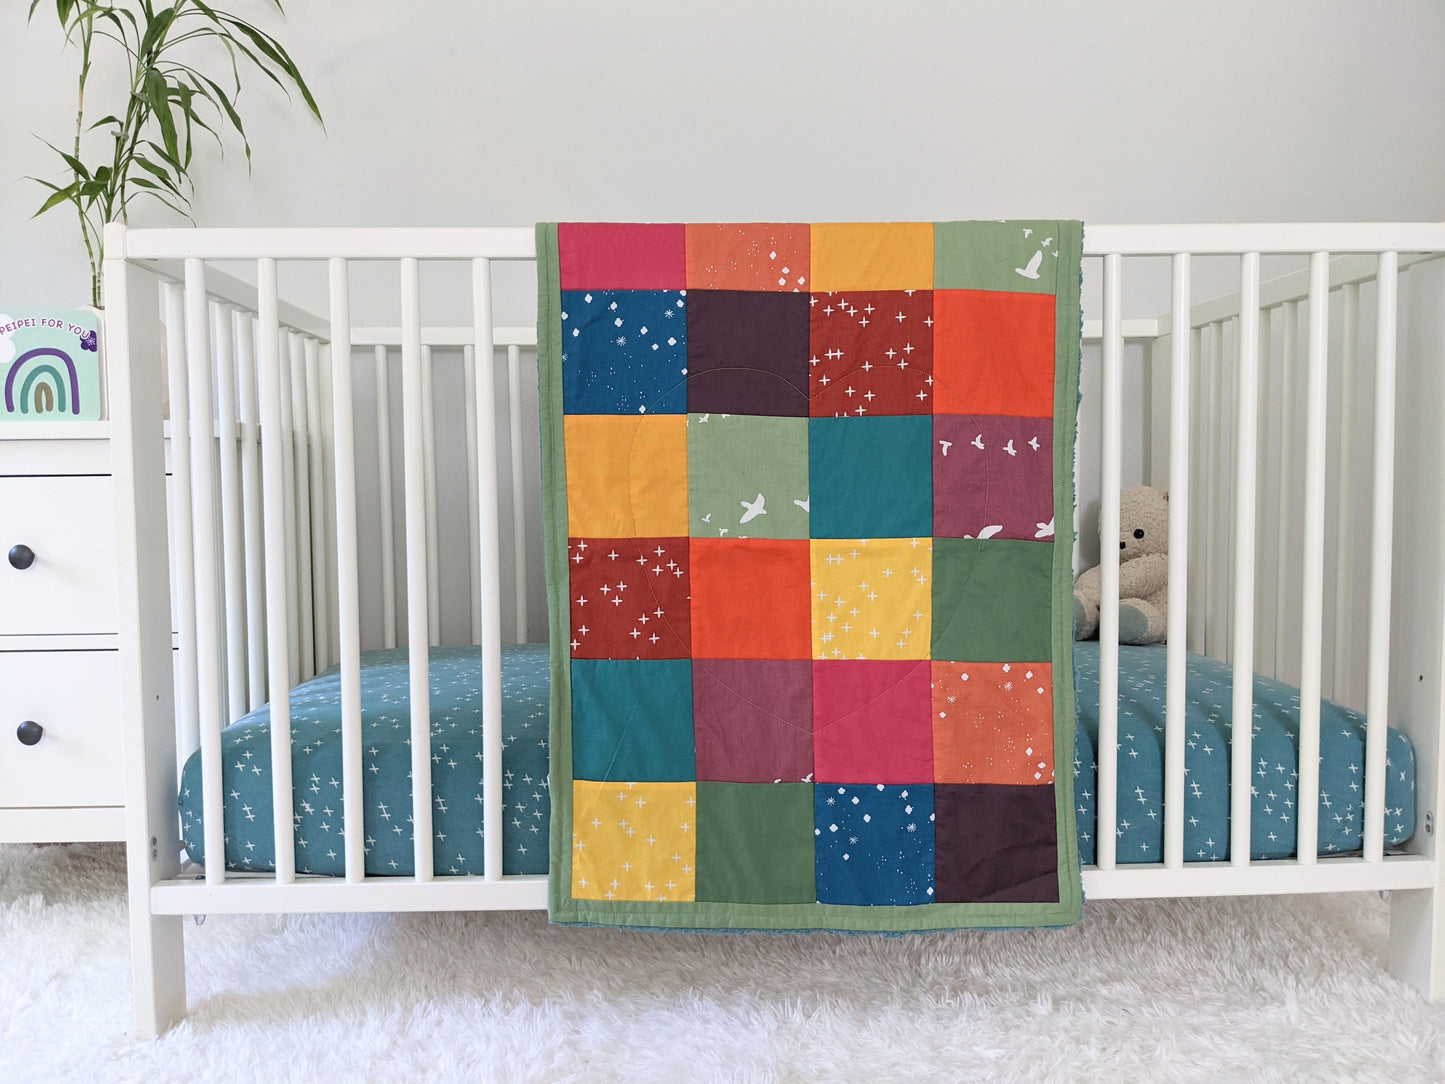 Baby Peipei 's organic patchwork quilts with bright colors. This patchwork quilt is security blankie size. With 12 fabrics, this quilt is reminiscent of the Bai Jia Bei Chinese quilt tradition 